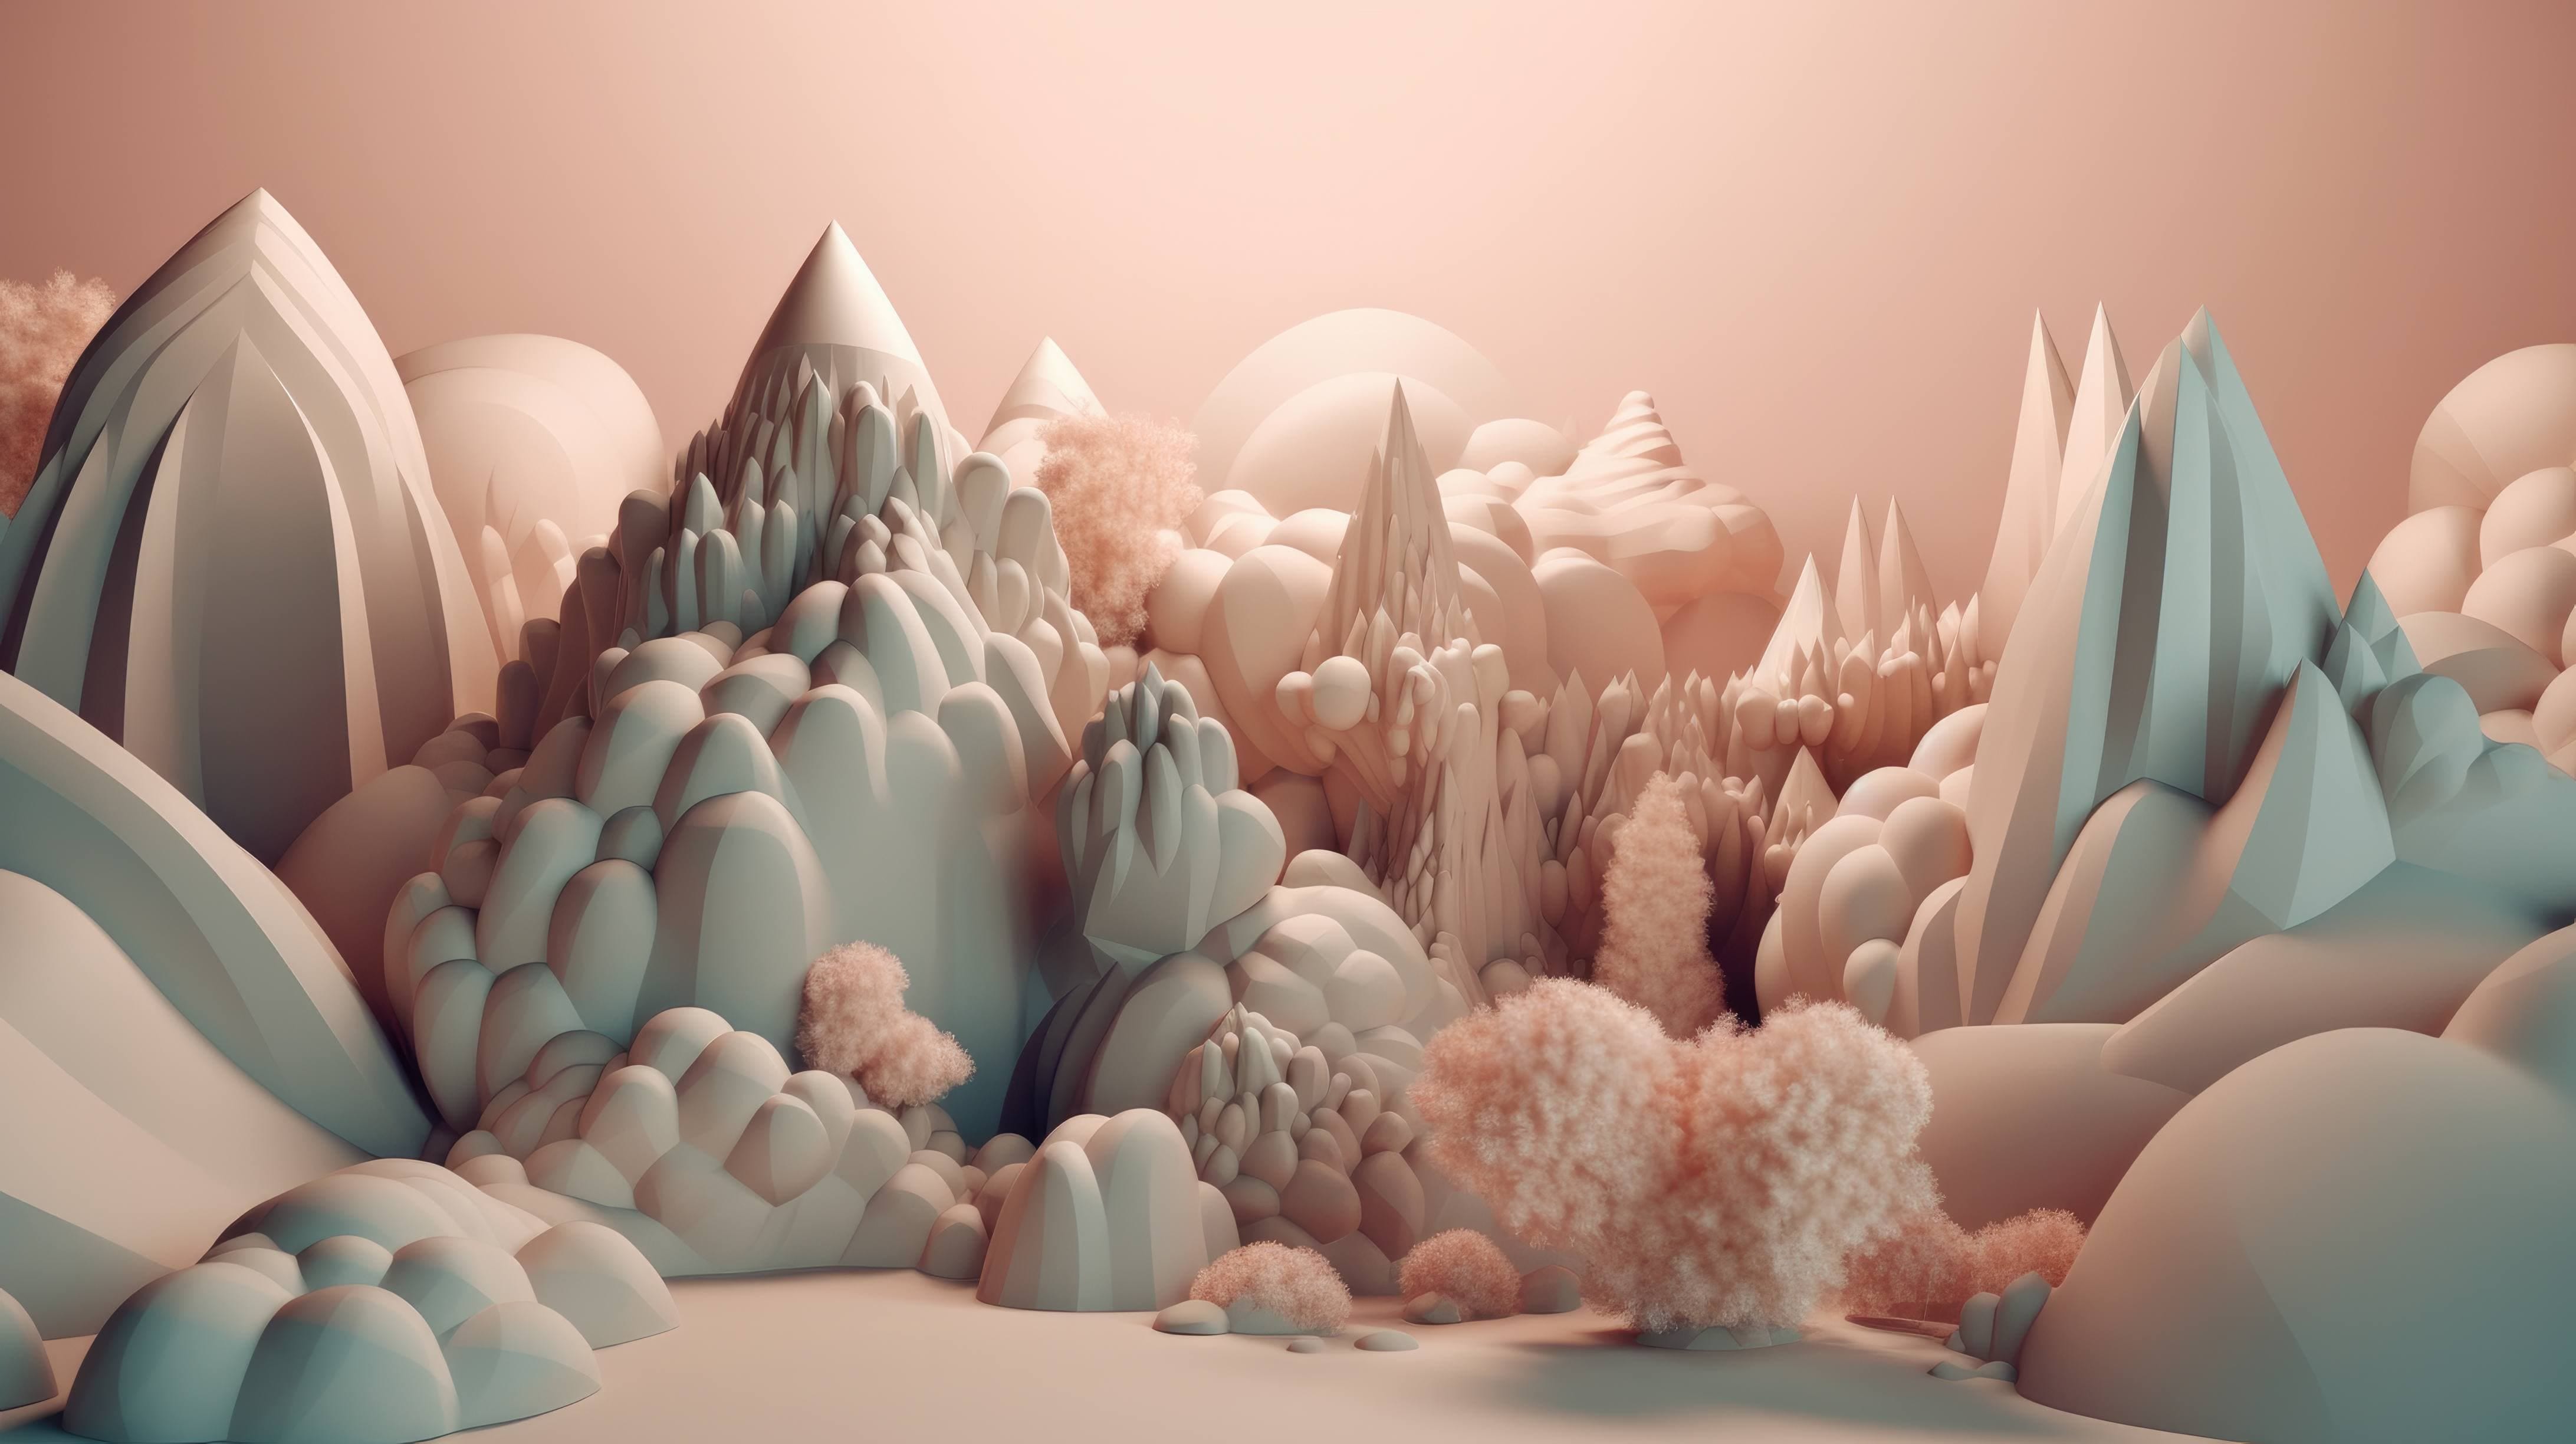 This 3D abstract landscape features a composition of surreal forms and dreamlike textures, perfect for a whimsical and surreal wallpaper